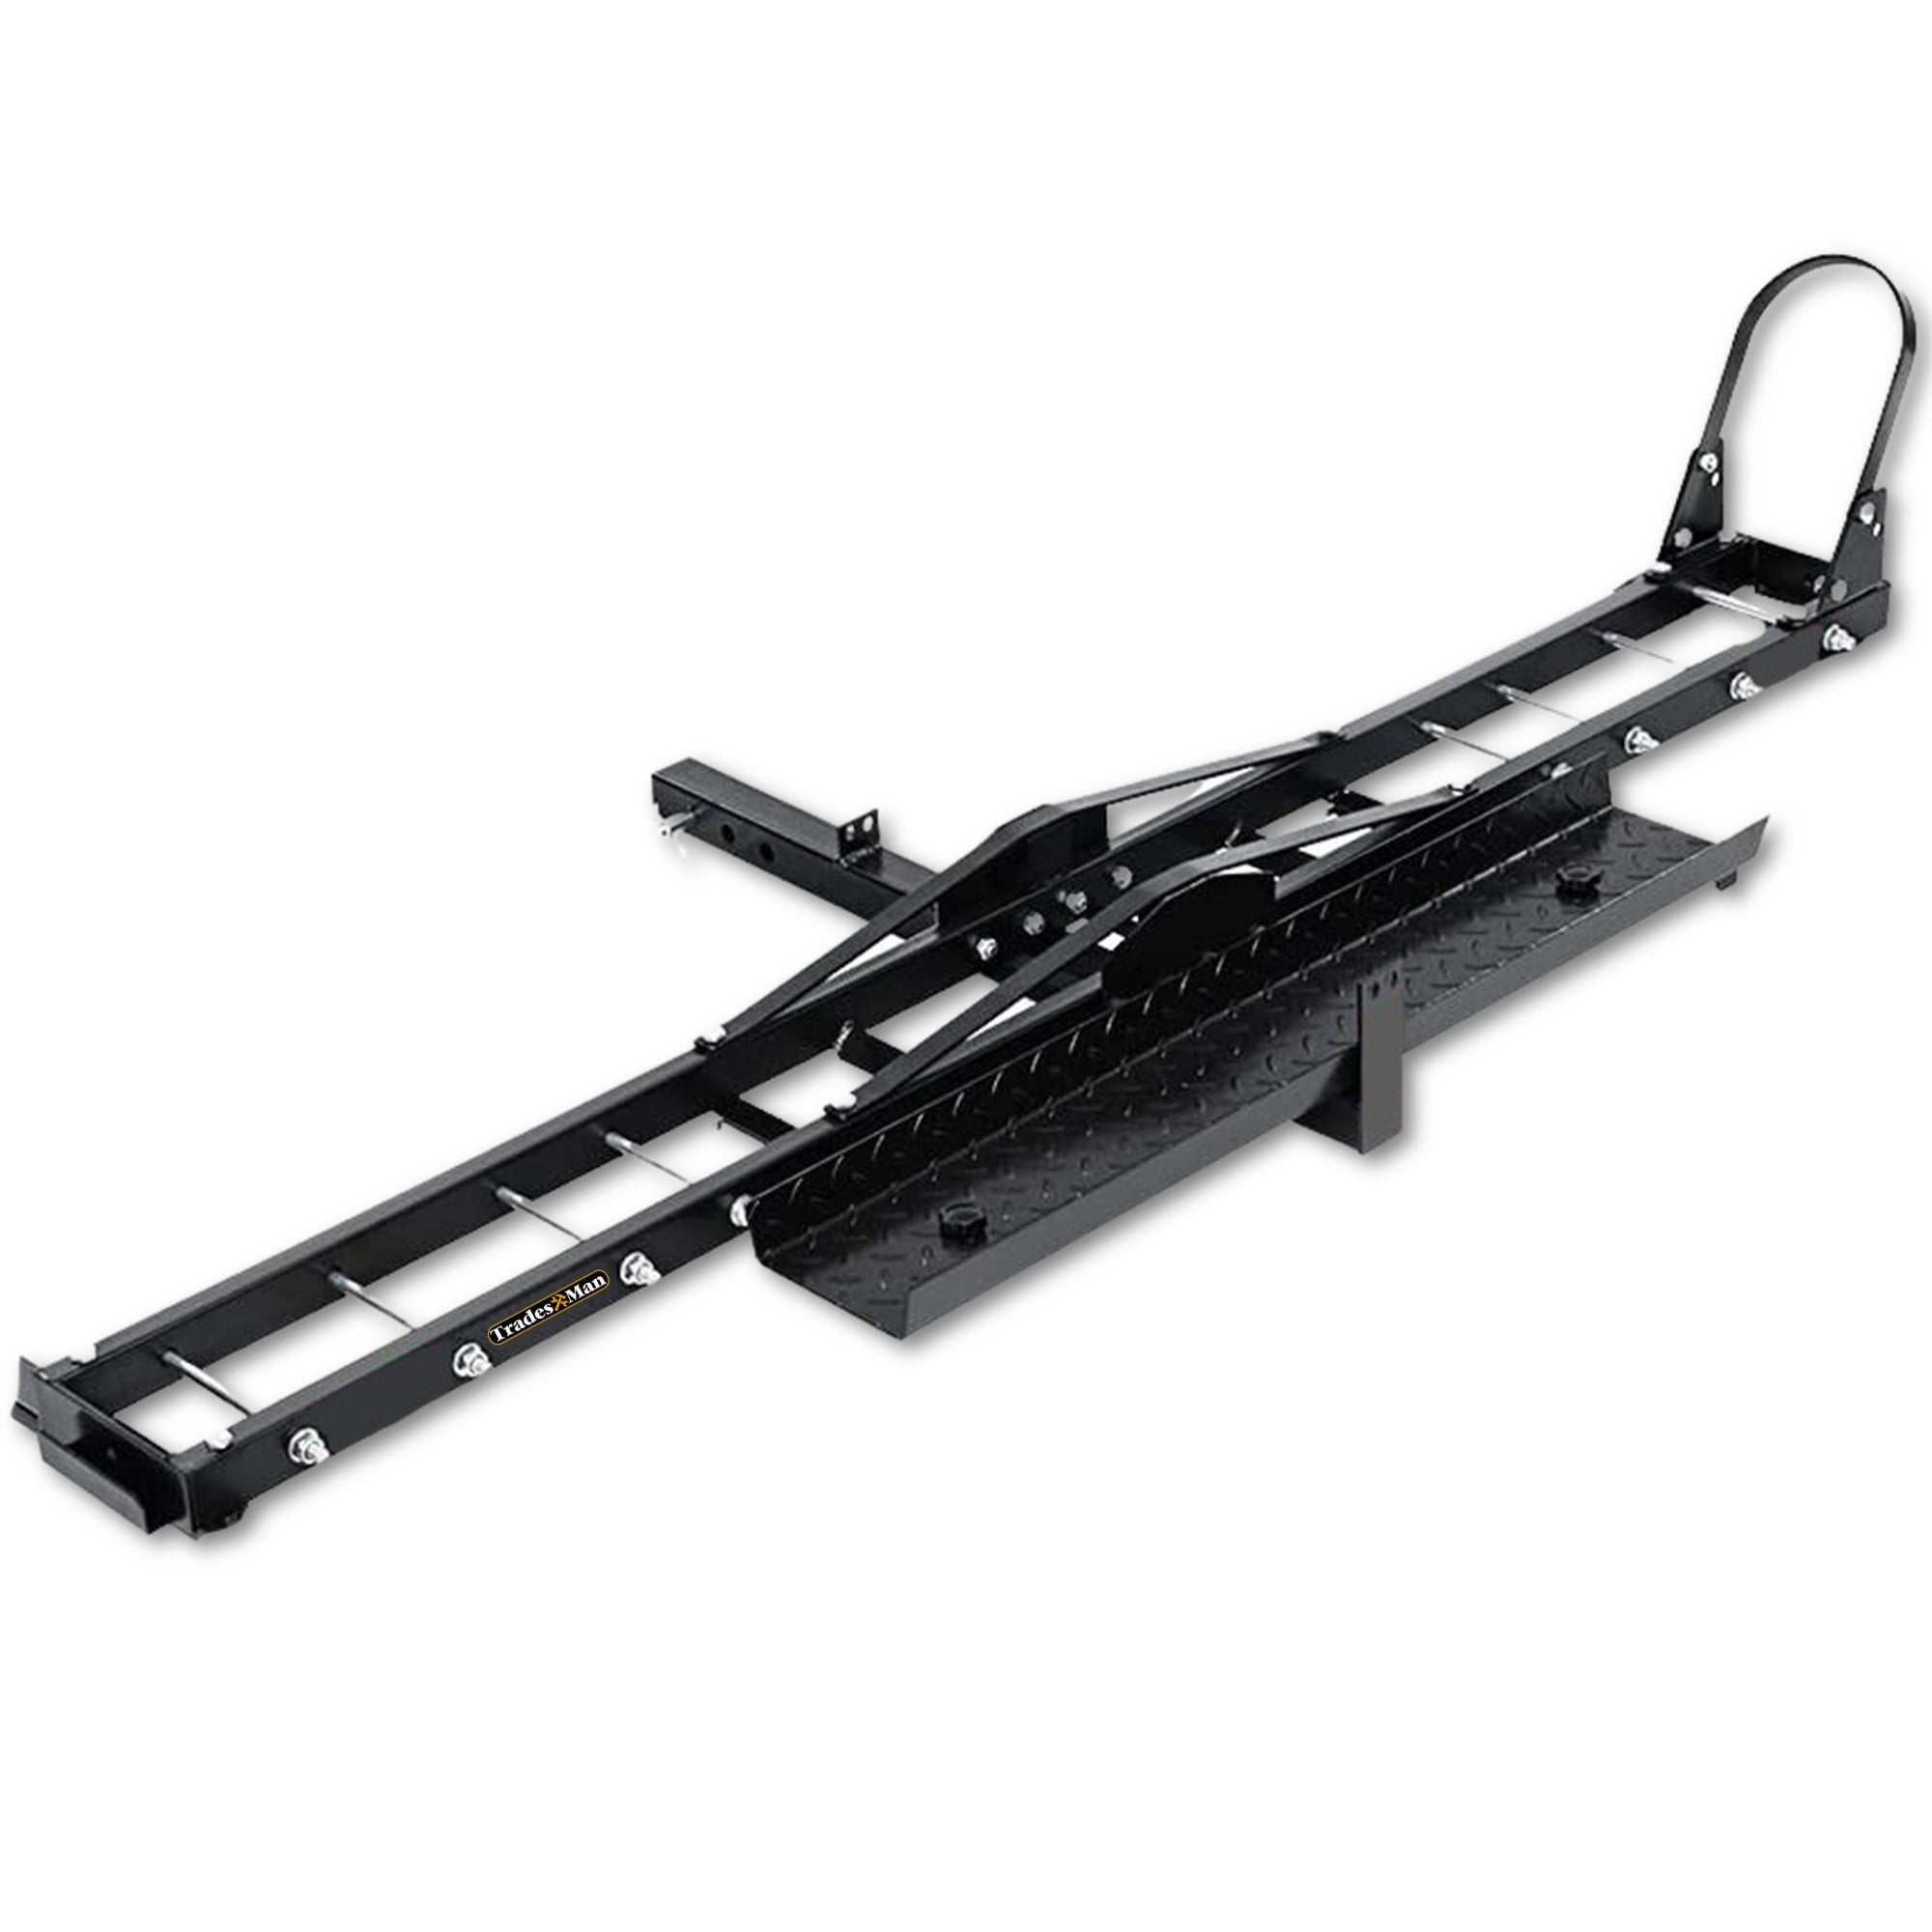 Motorcycle Carrier Rack - Mid Towing